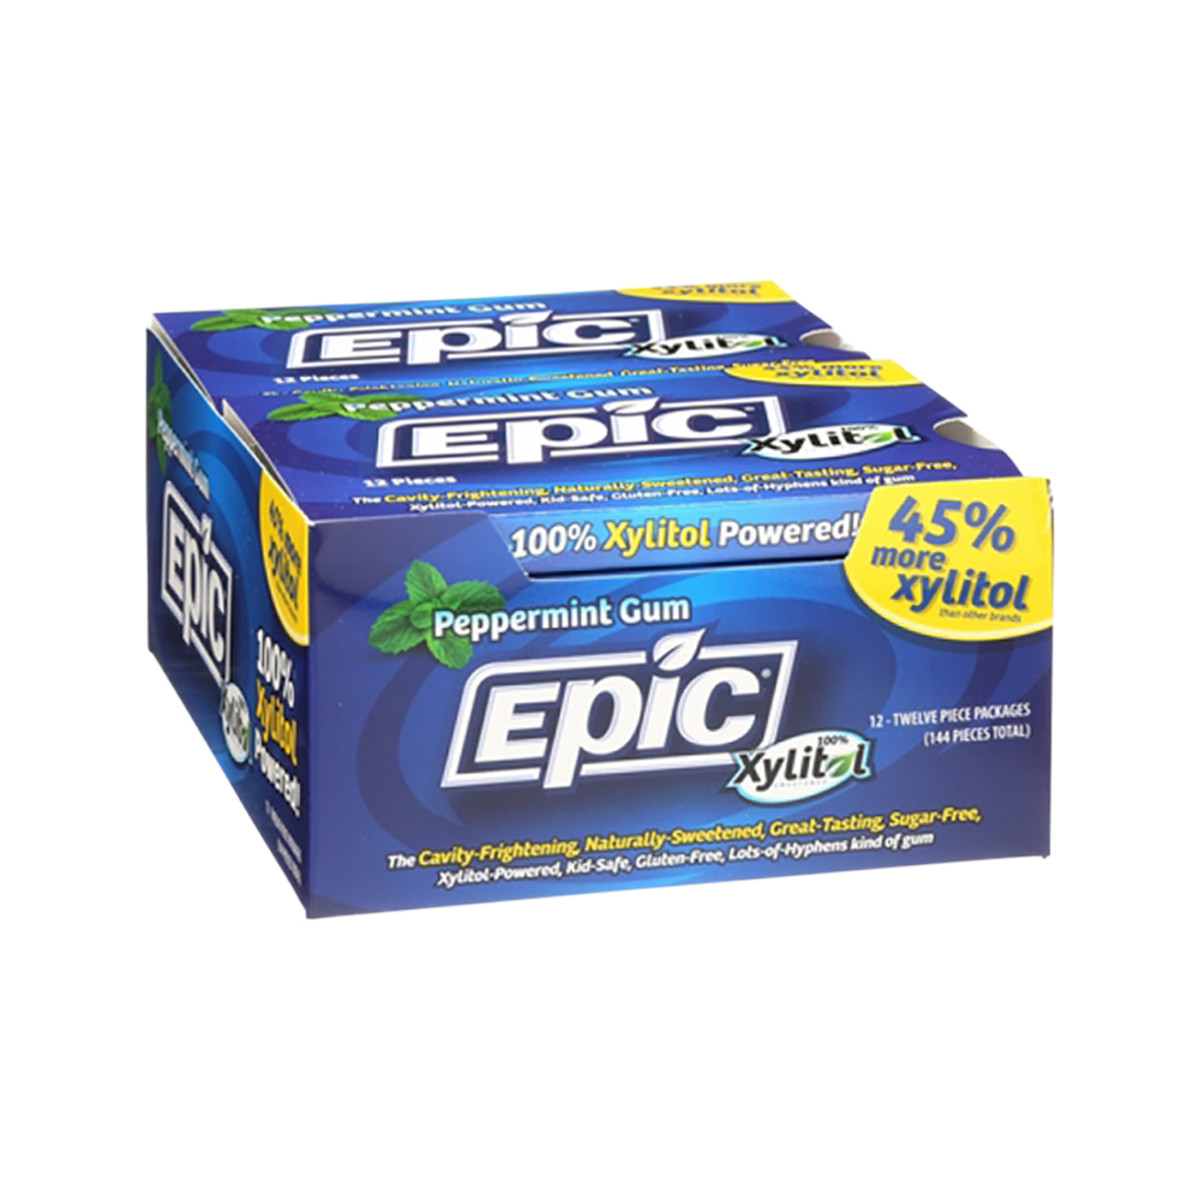 Epic Xylitol (Sugar-Free) Gum Peppermint 12 Piece Blister Pack x 12 Display